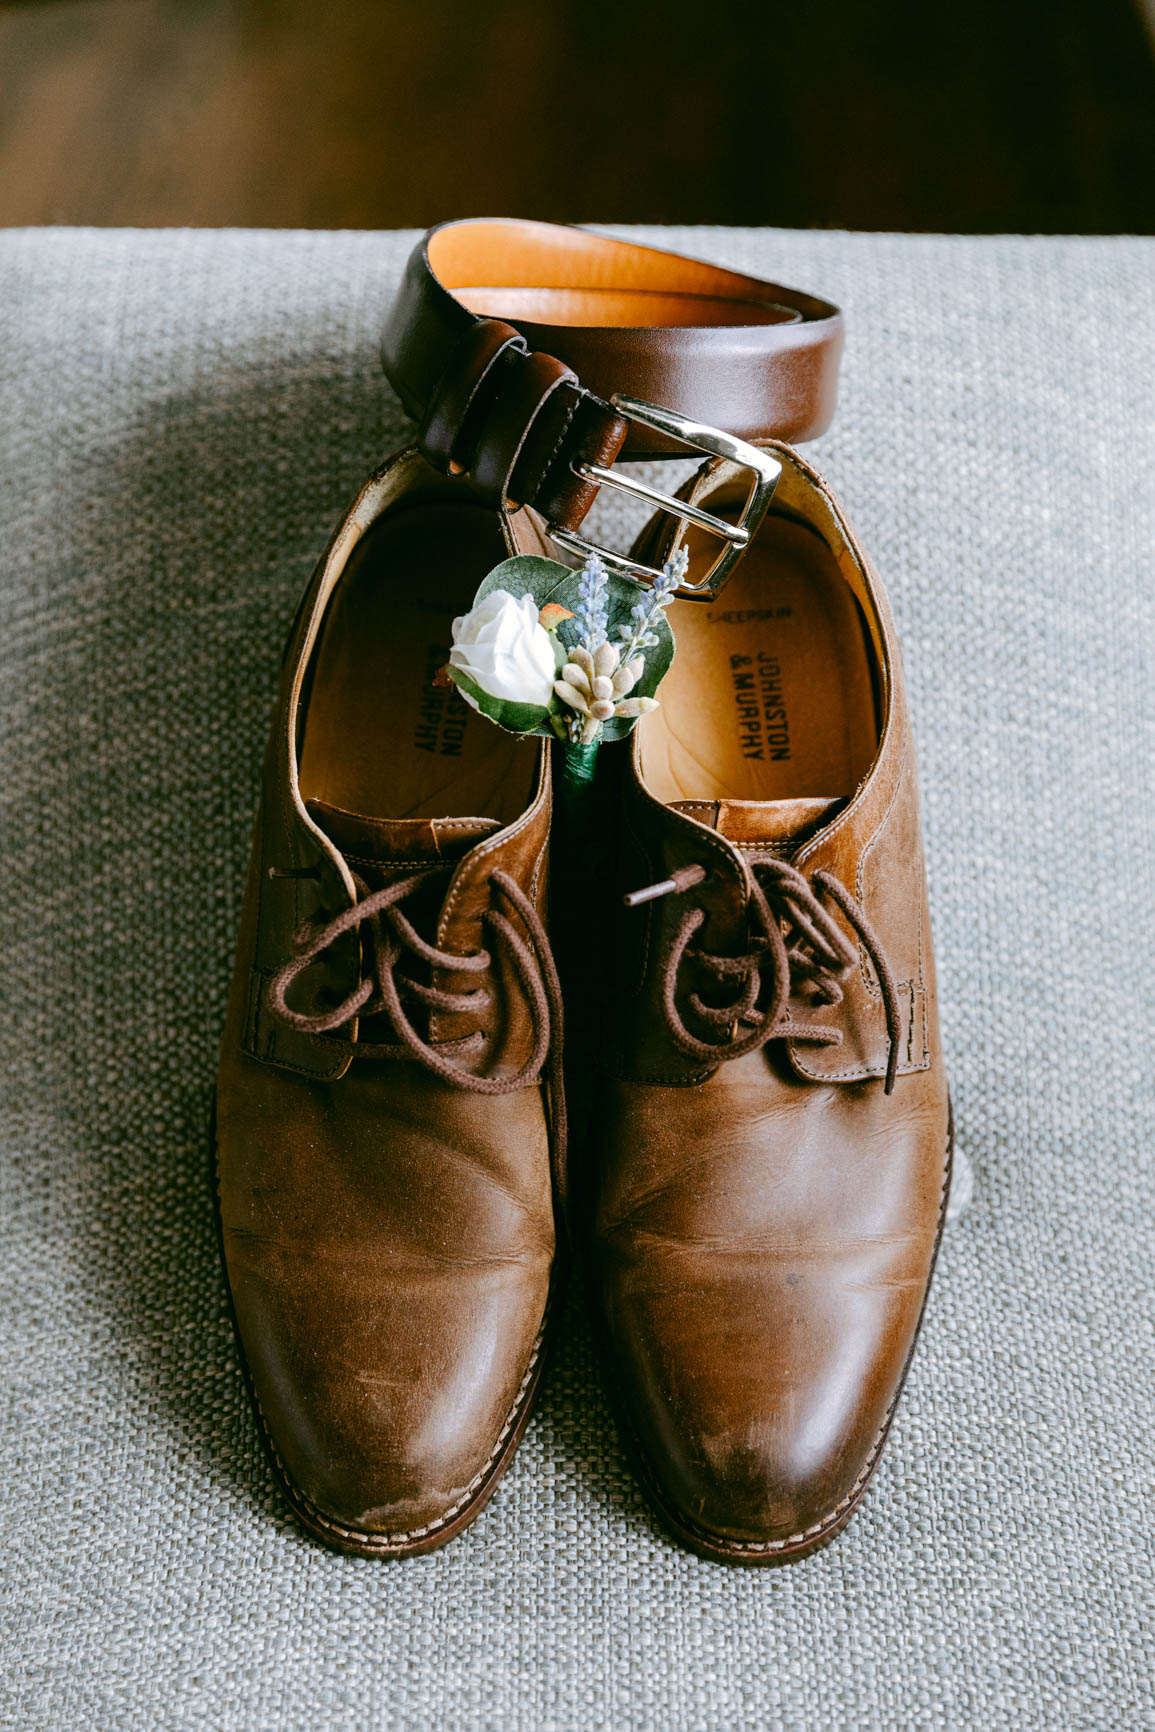 groom shoes from lake house elopement shot by Nhieu Tang Photography | nhieutang.com